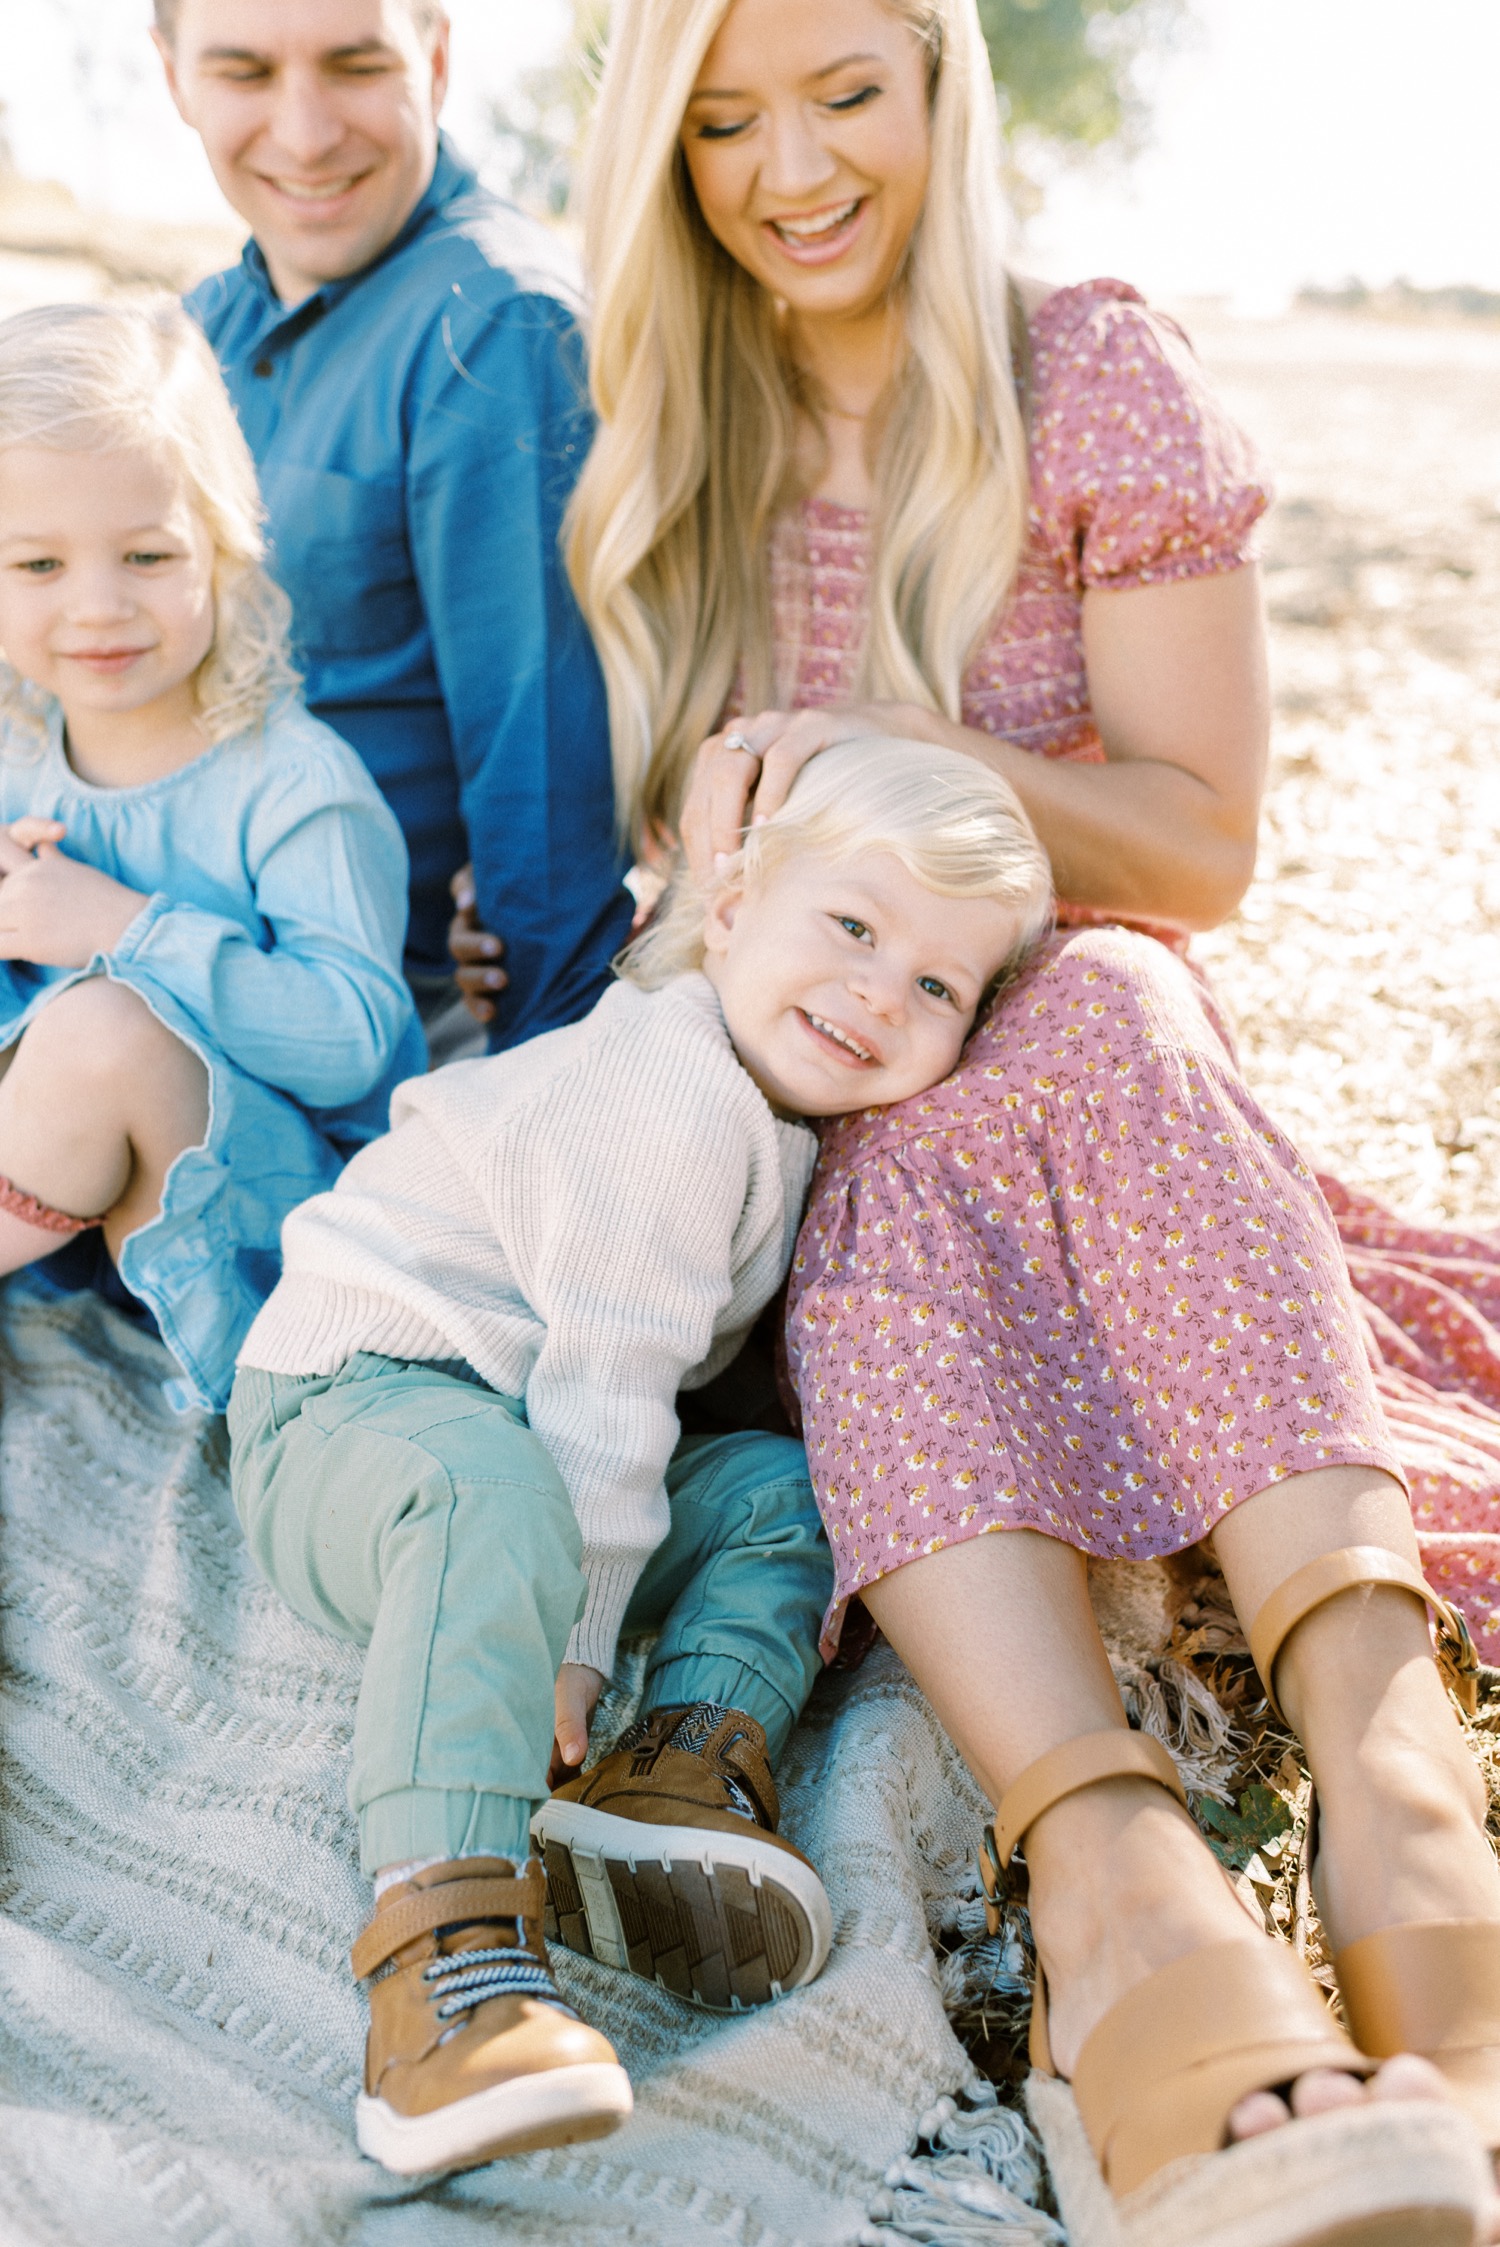 Top 10 Ways to Rock Your Family Photo Session by Nicole Everson -